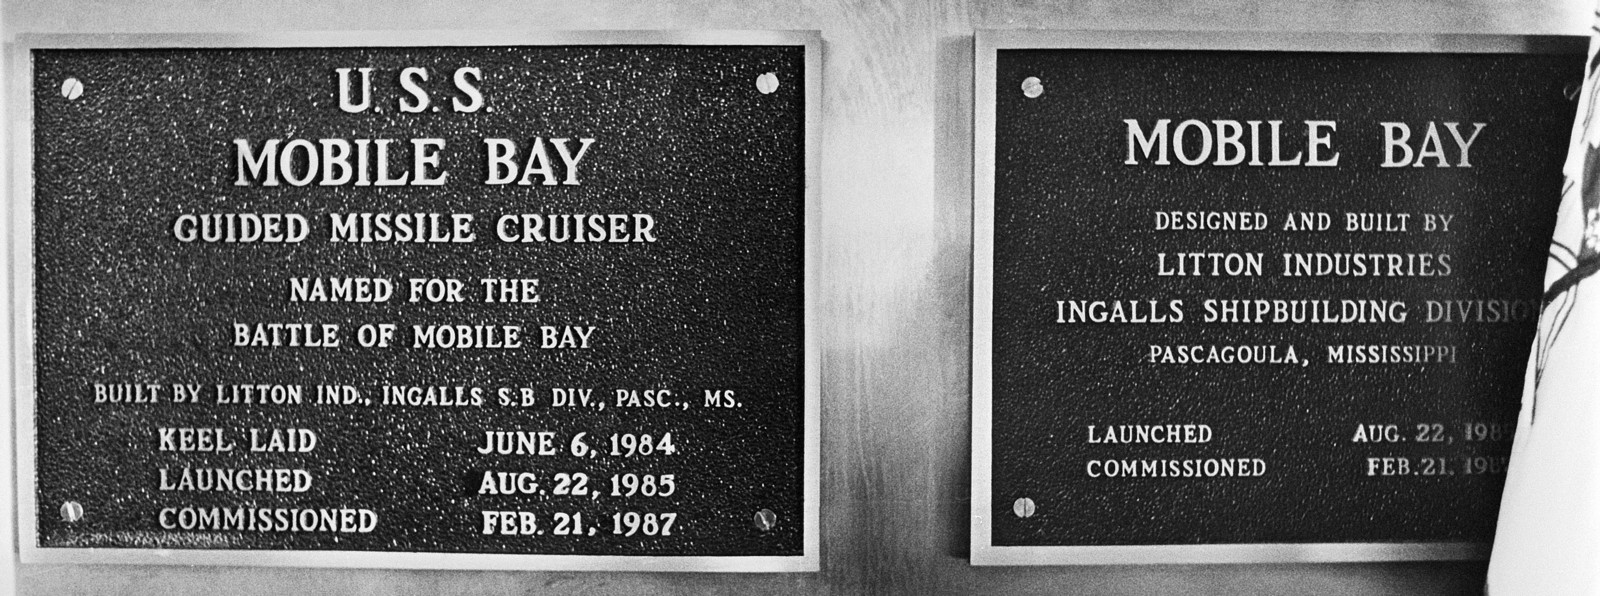 cg-53 uss mobile bay ticonderoga class guided missile cruiser aegis us navy plaque 04